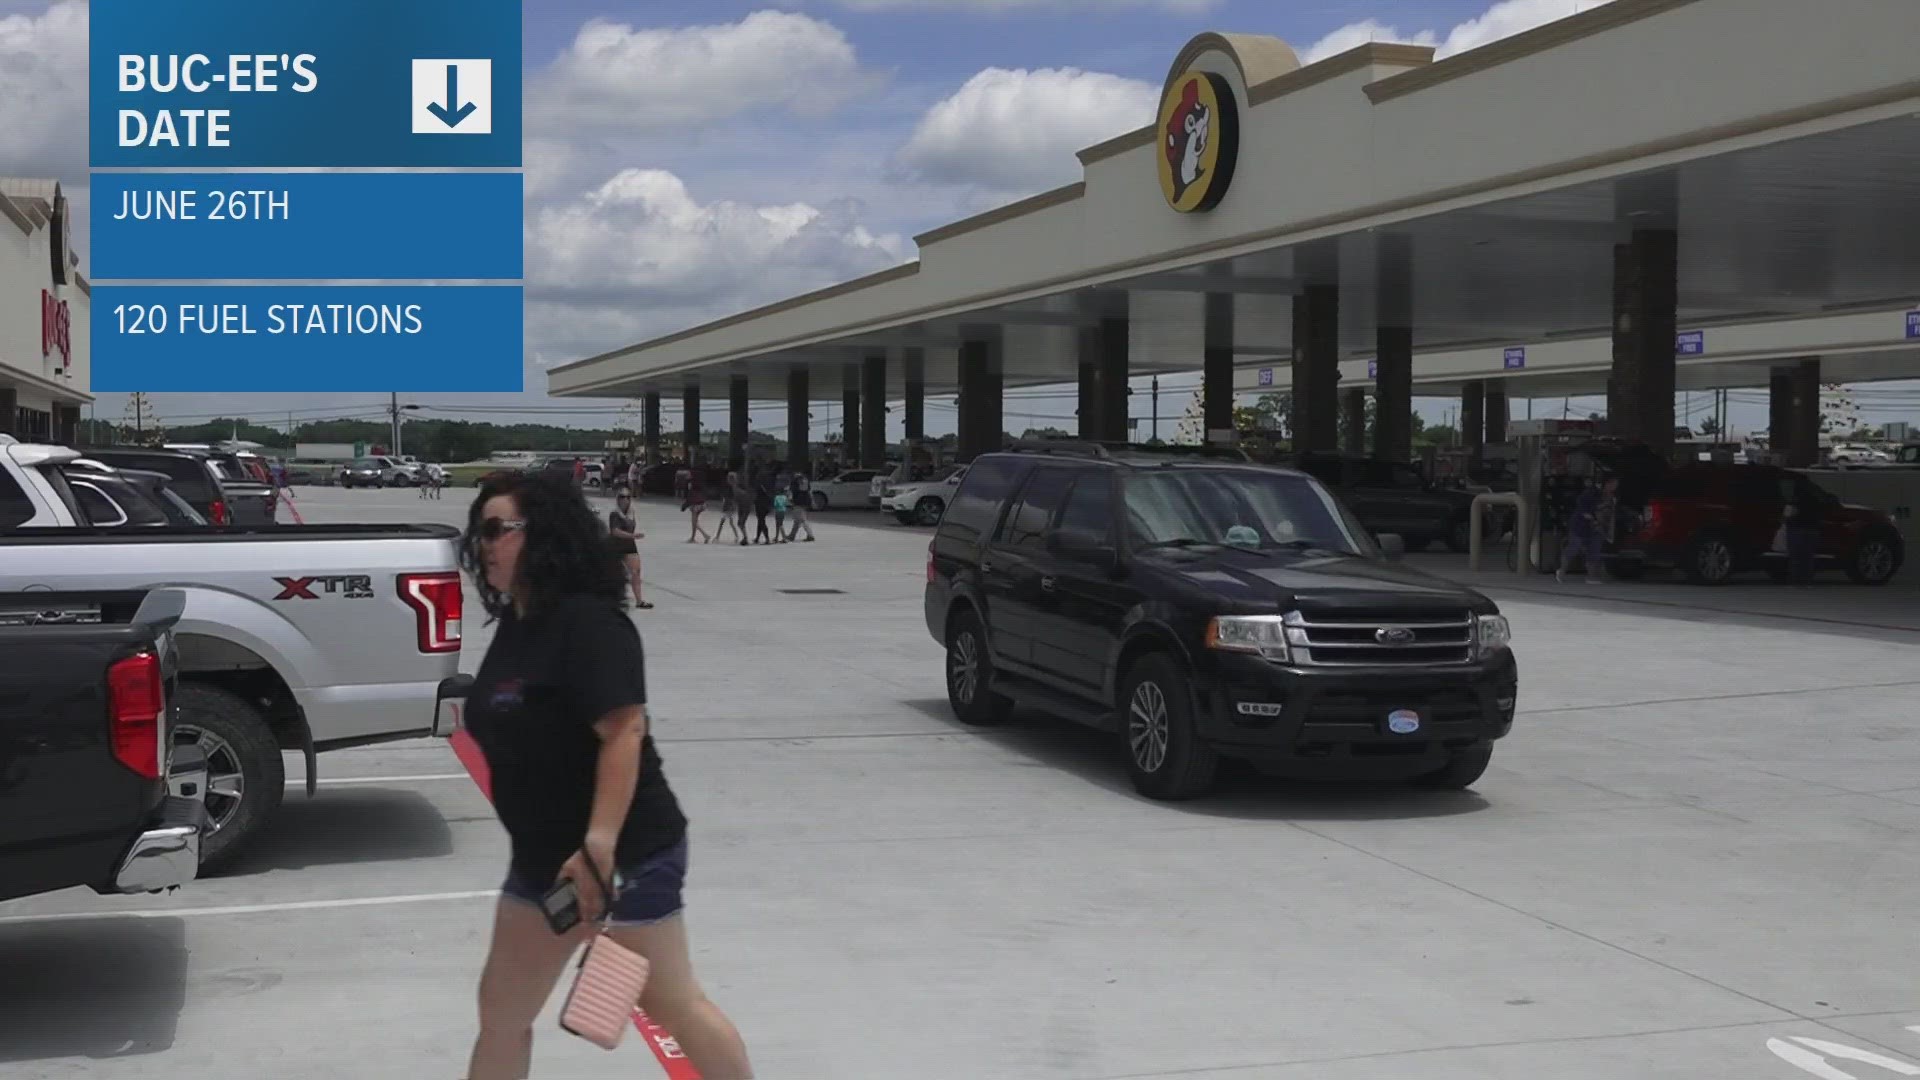 After the opening of Buc-ee’s Sevierville, Buc-ee’s will operate 46 stores across Texas and the South.